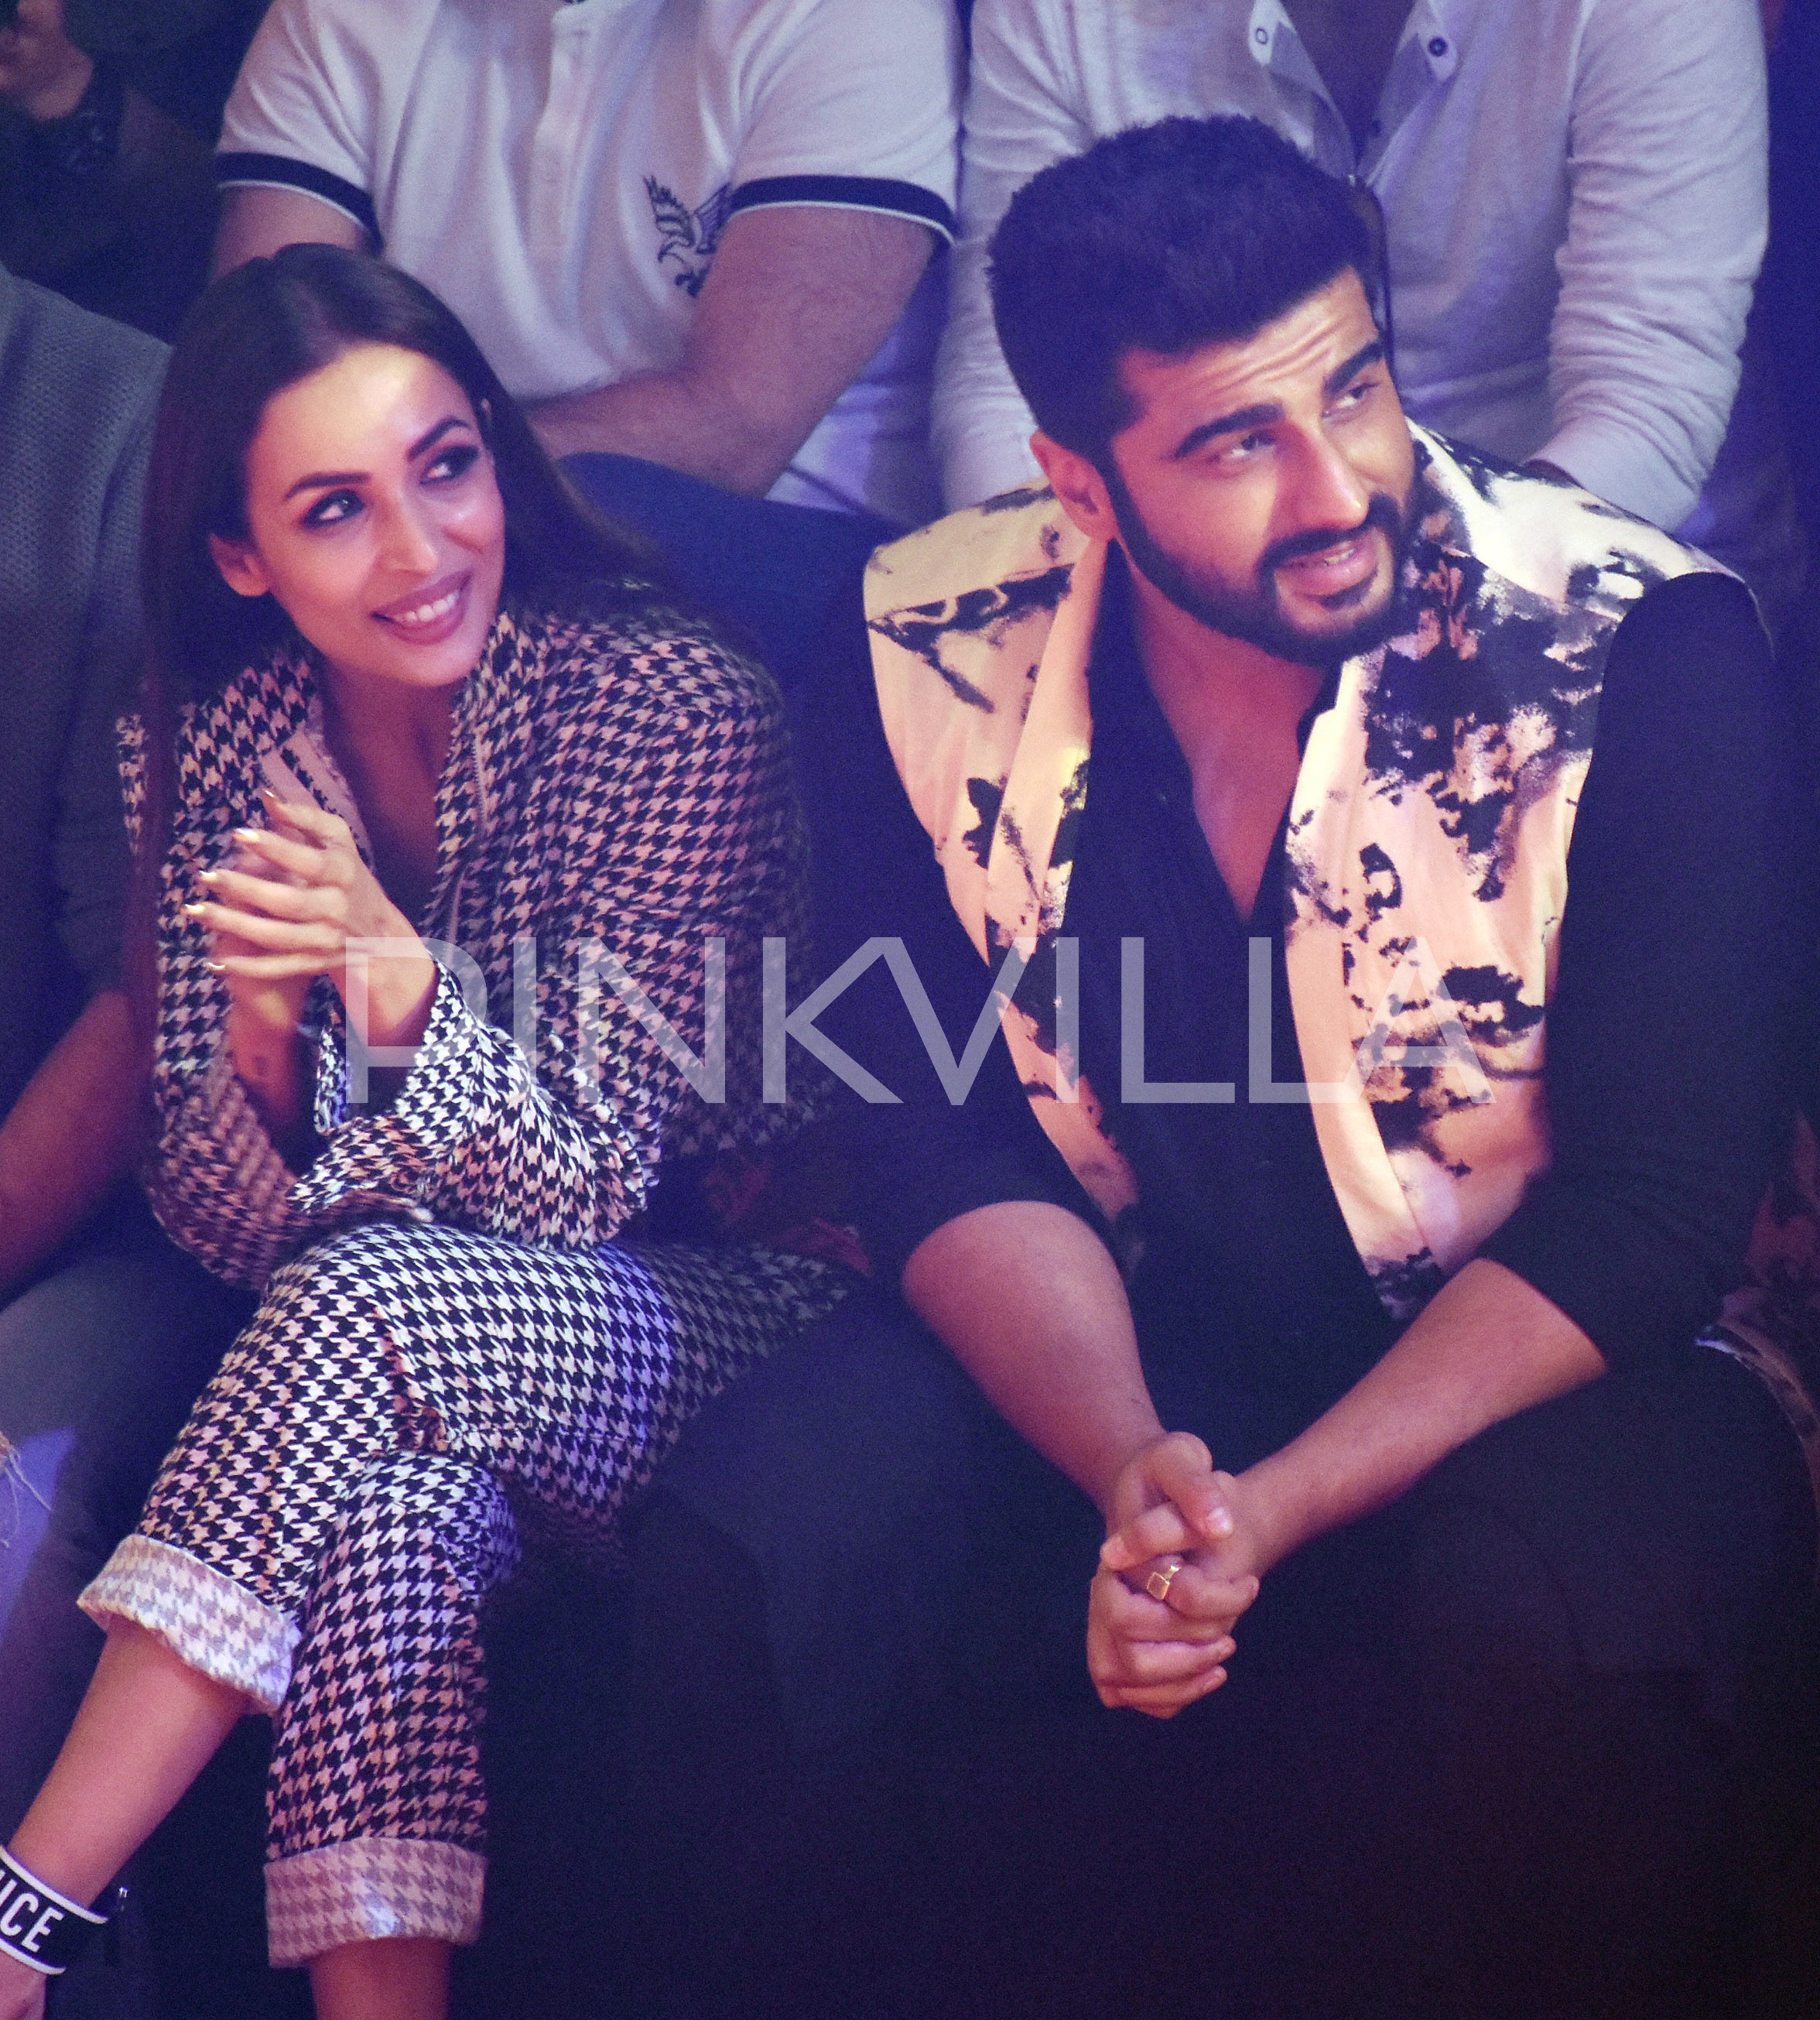 EXCLUSIVE: Arjun Kapoor and Malaika Arora to tie the knot in April 2019?